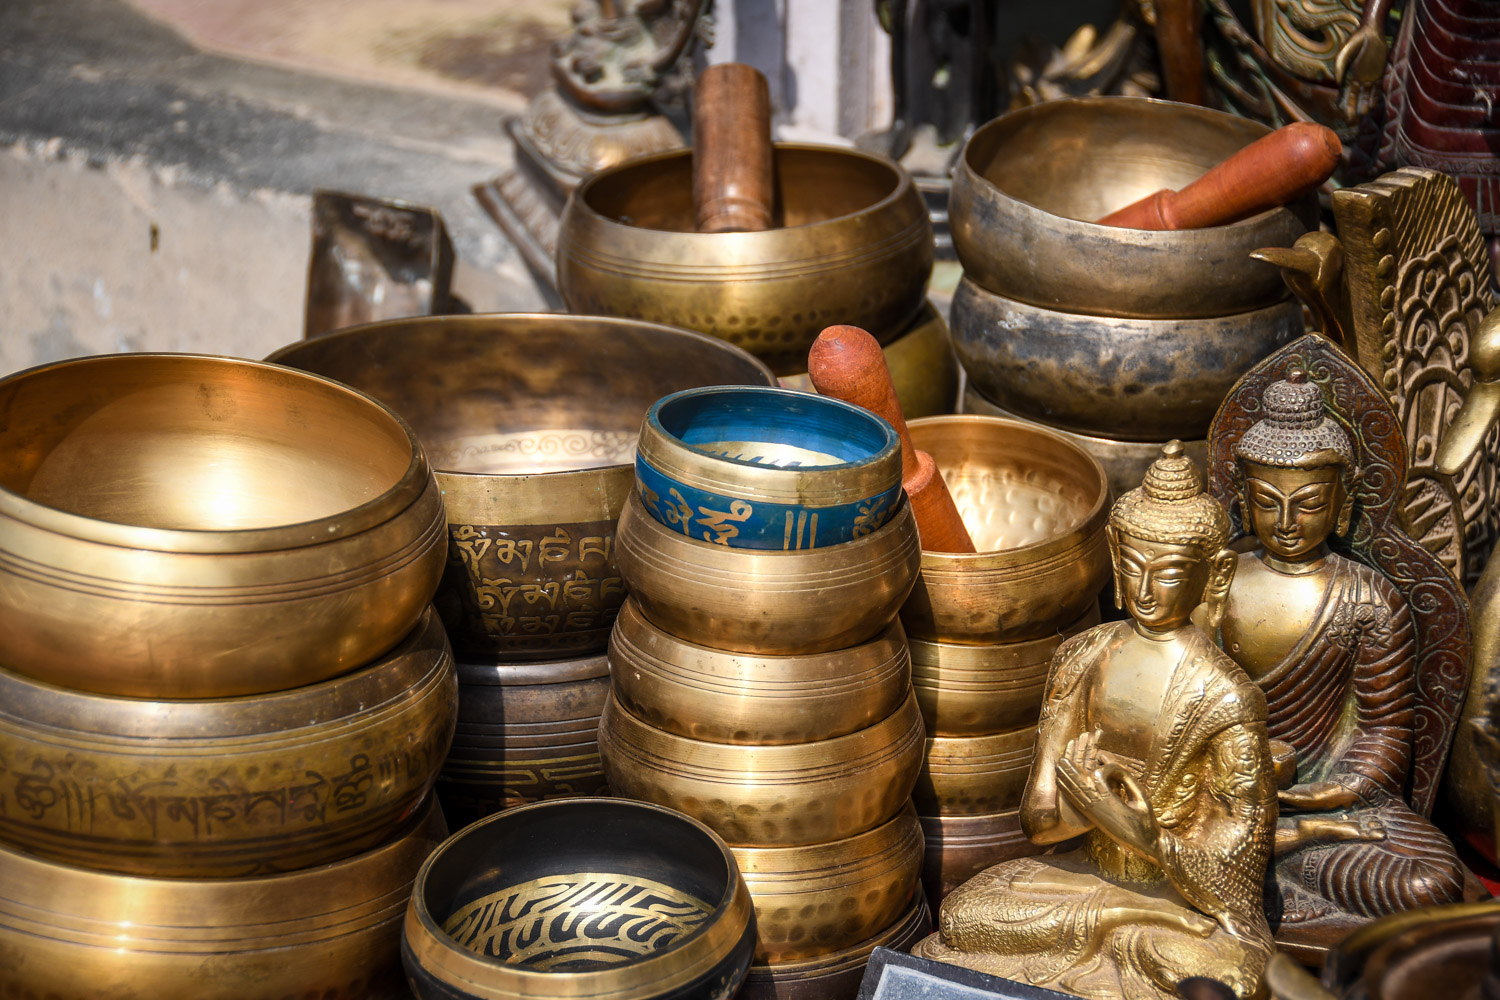 Things to Do in Nepal markets singing Bowls